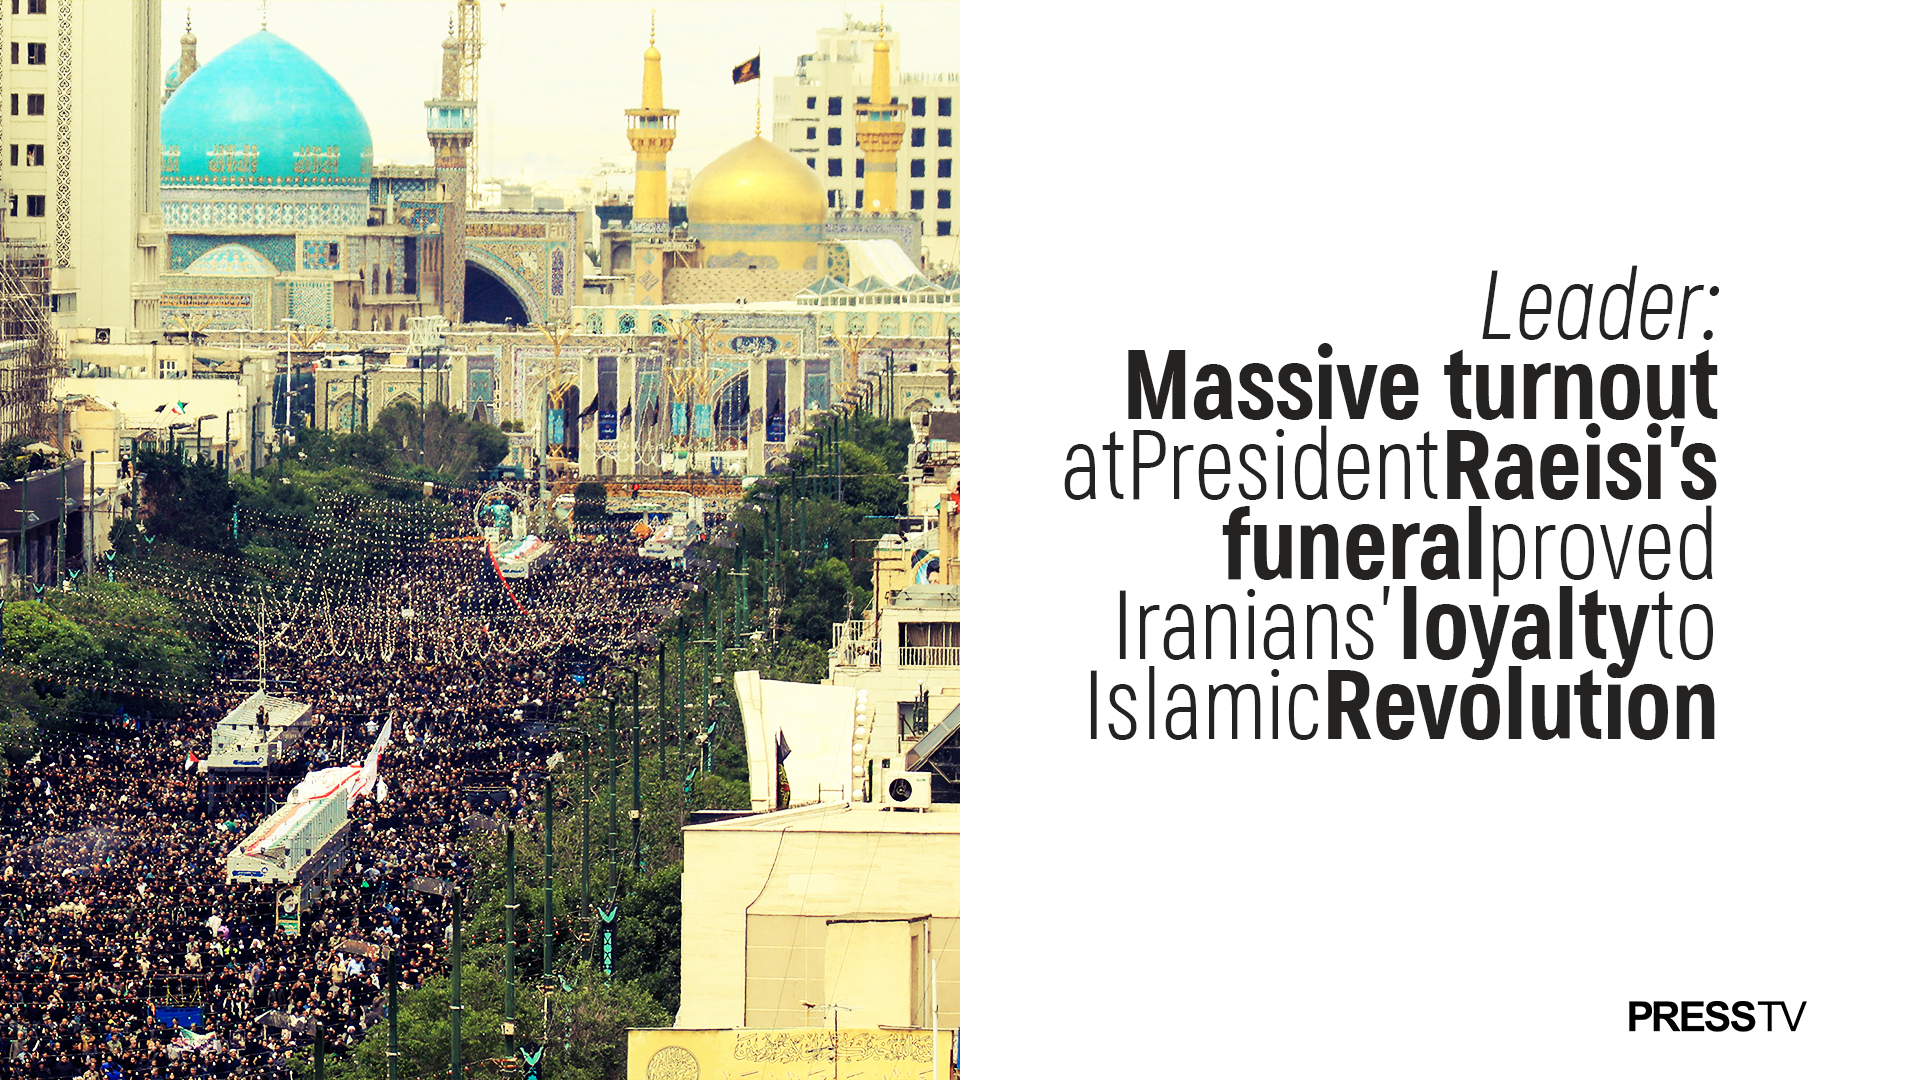 Leader: Massive turnout at Raeisi’s funeral proved Iranians’ loyalty to Islamic Revolution